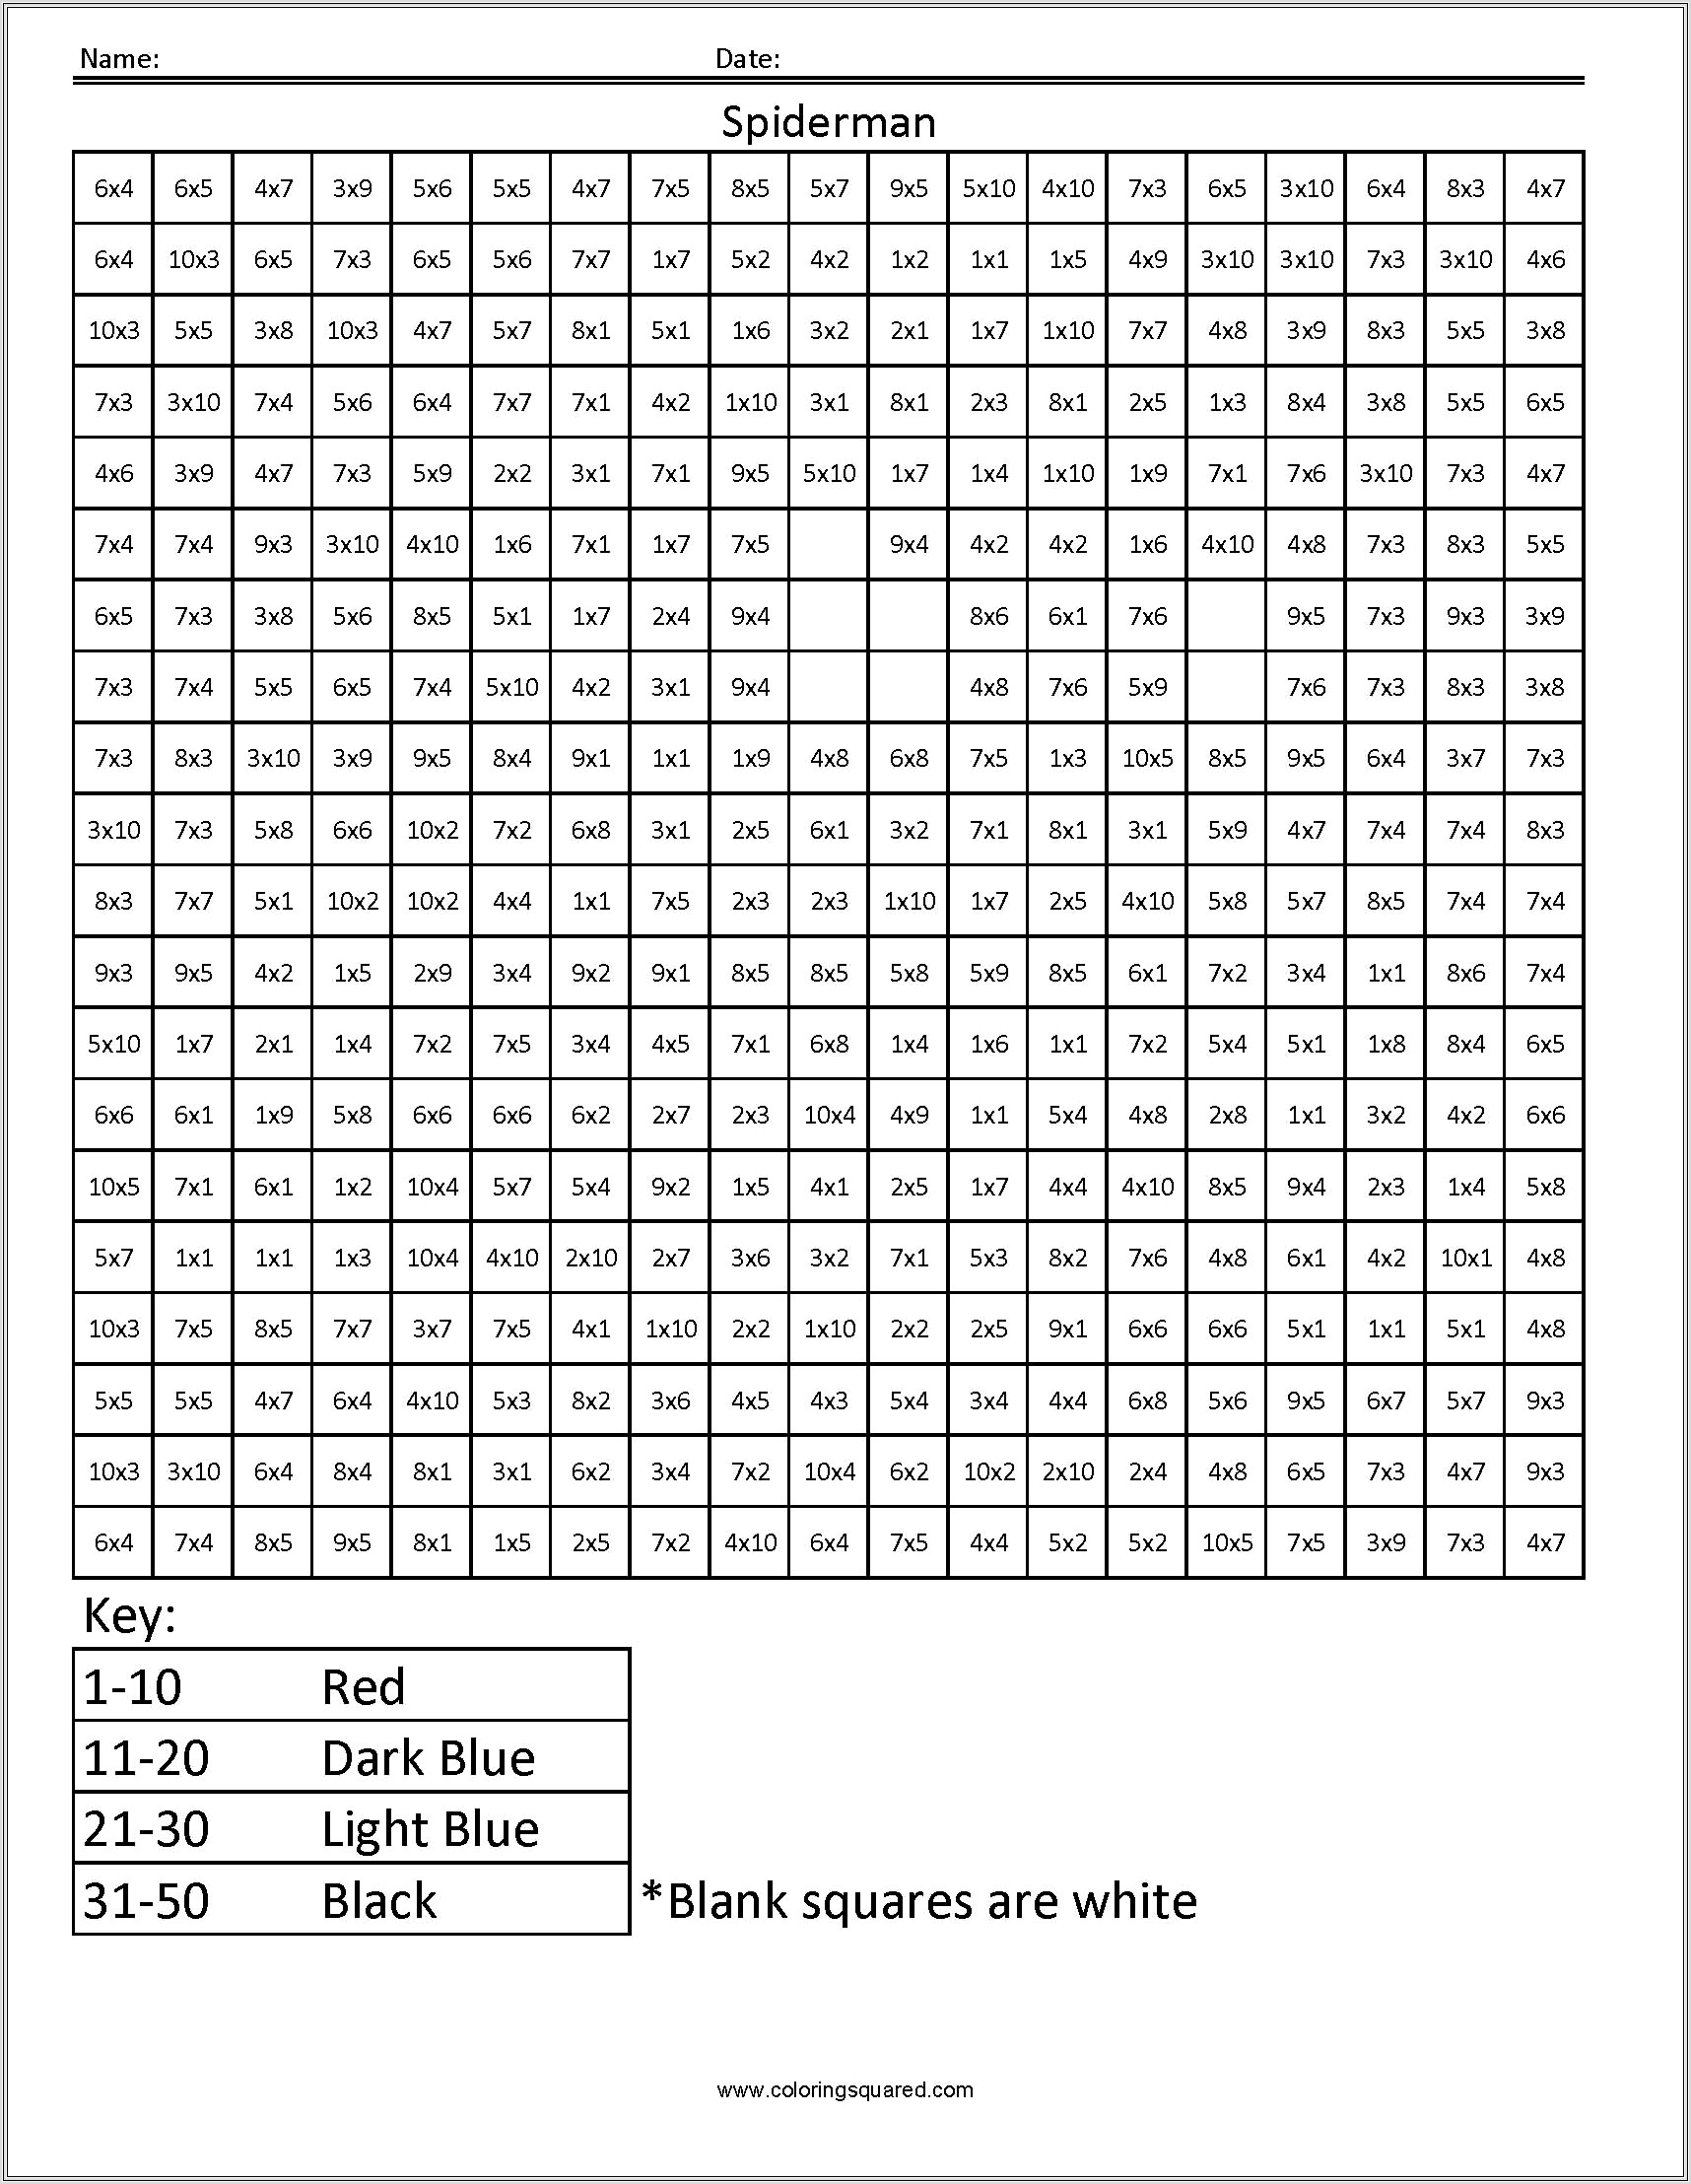 Math Facts Worksheets Free